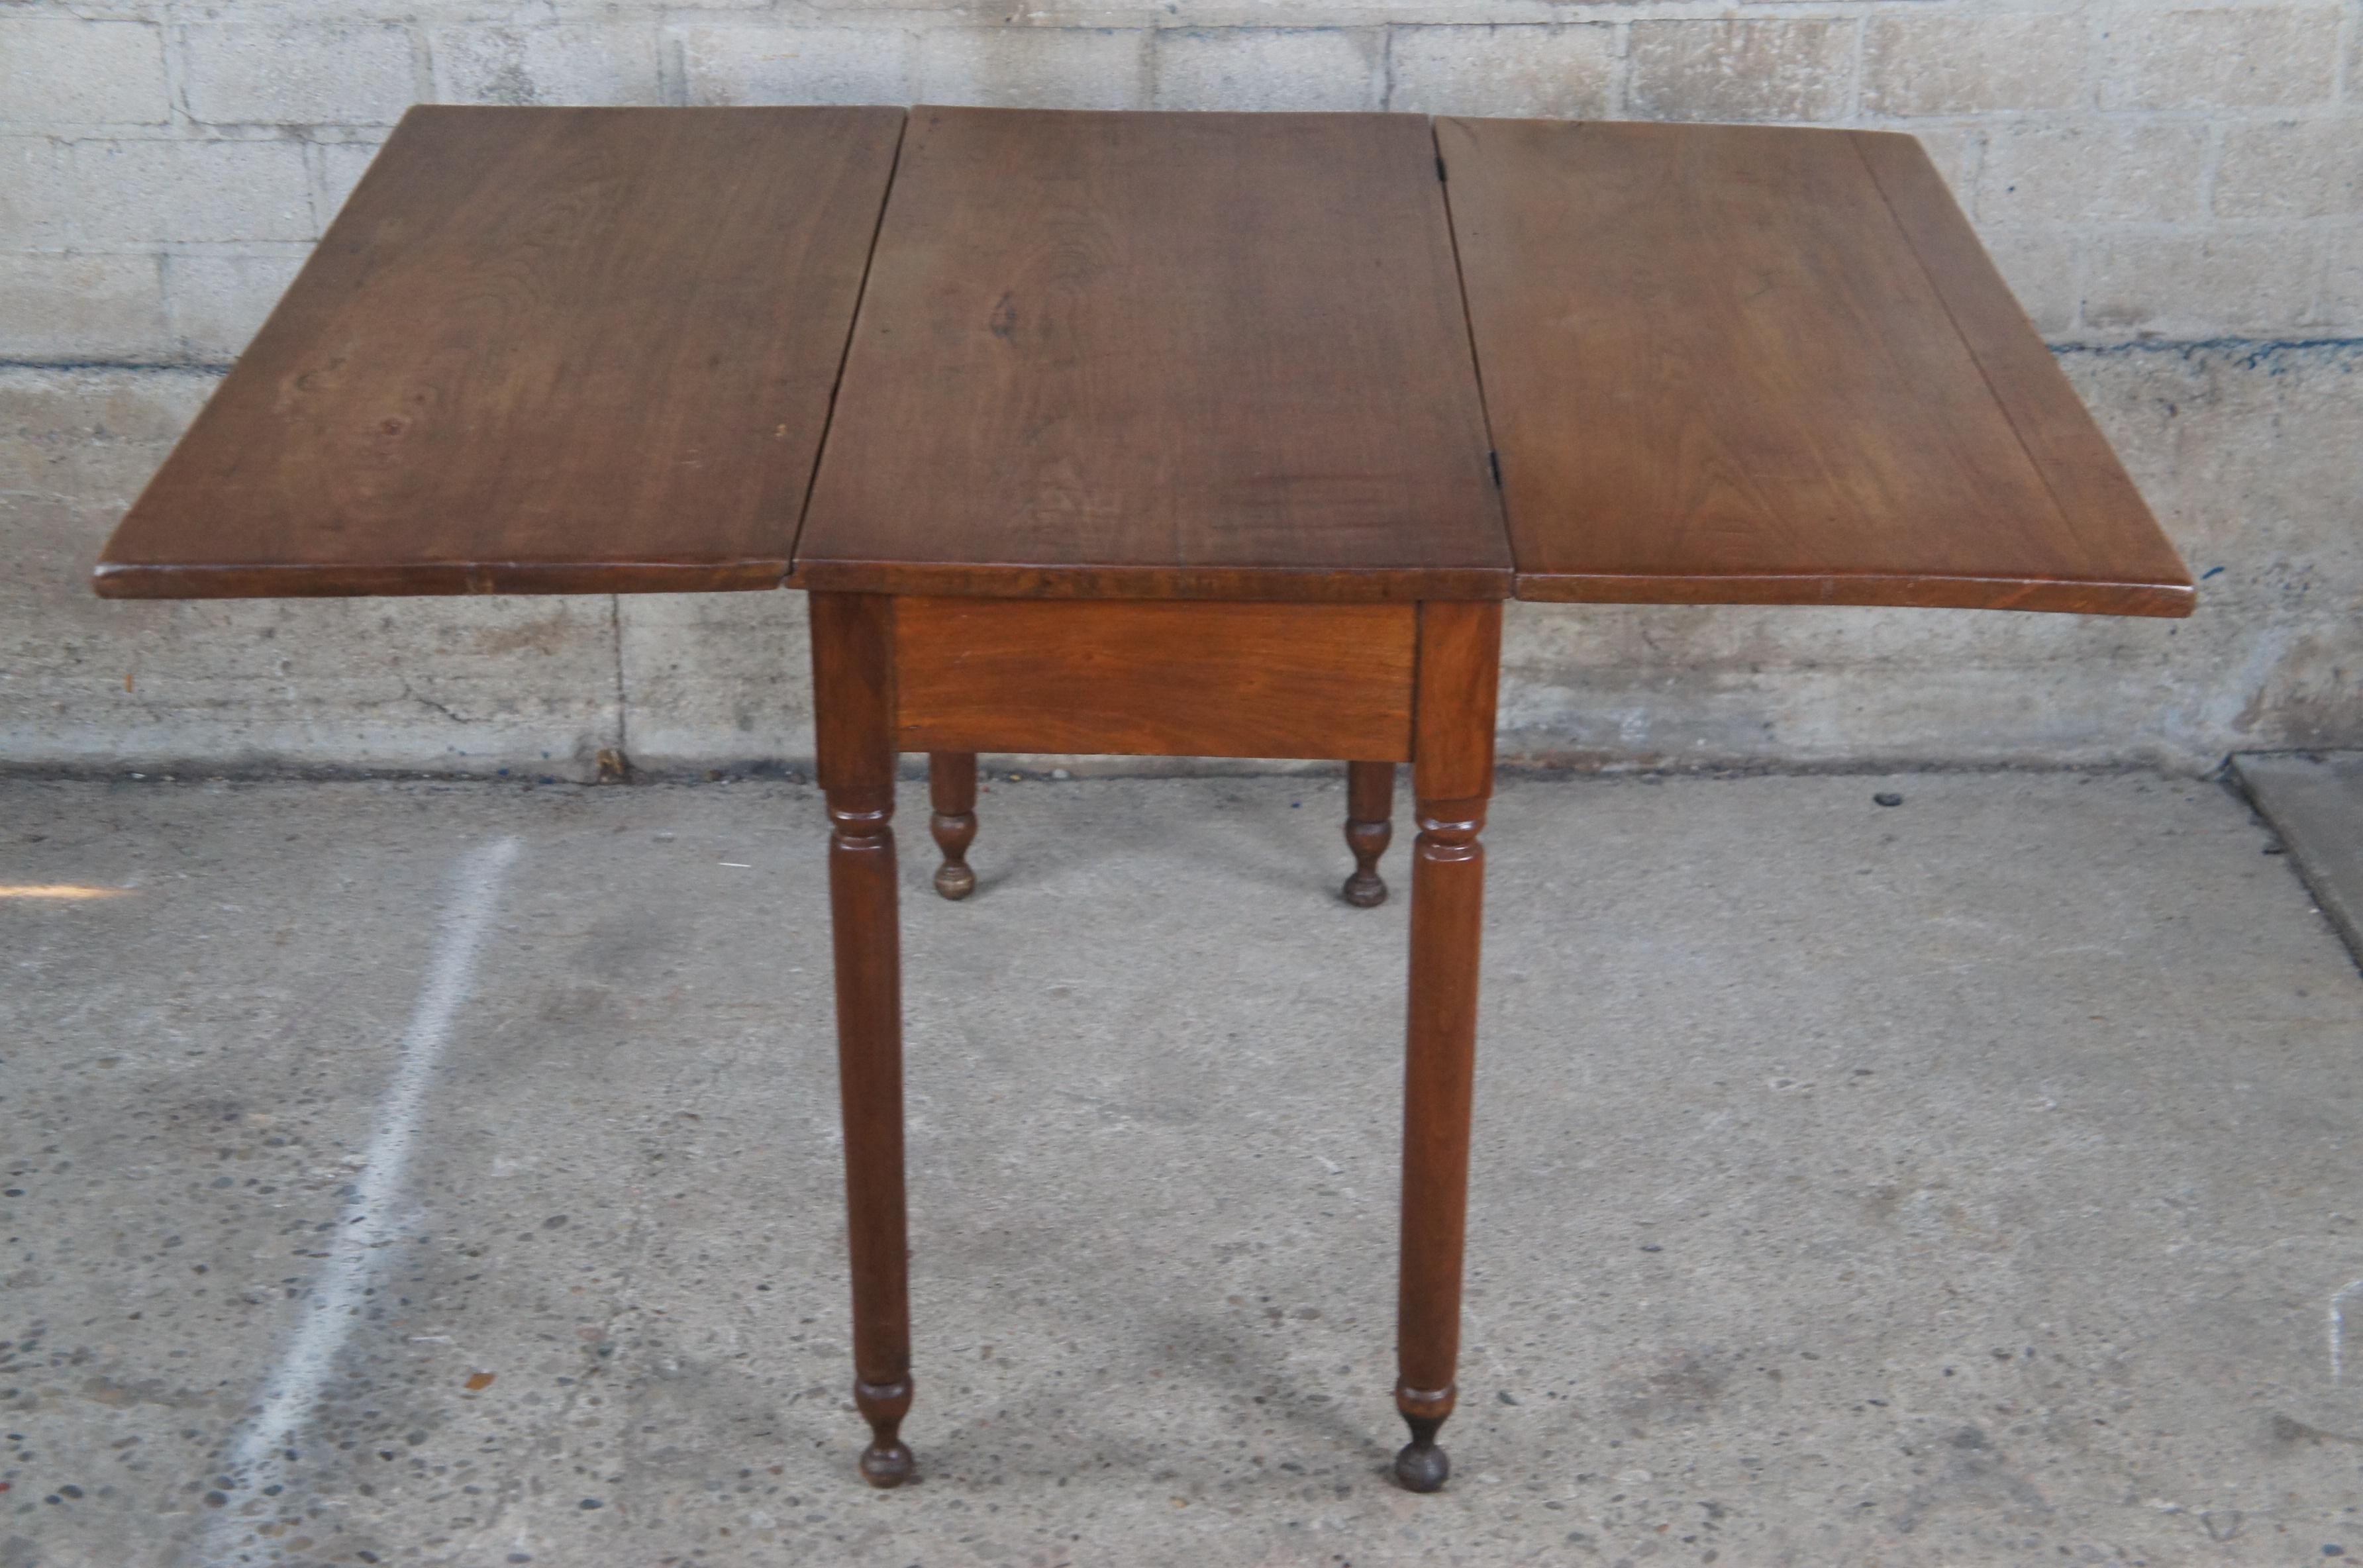 Antique Early American Walnut Drop Leaf Farmhouse Dining Table Entry Console 41